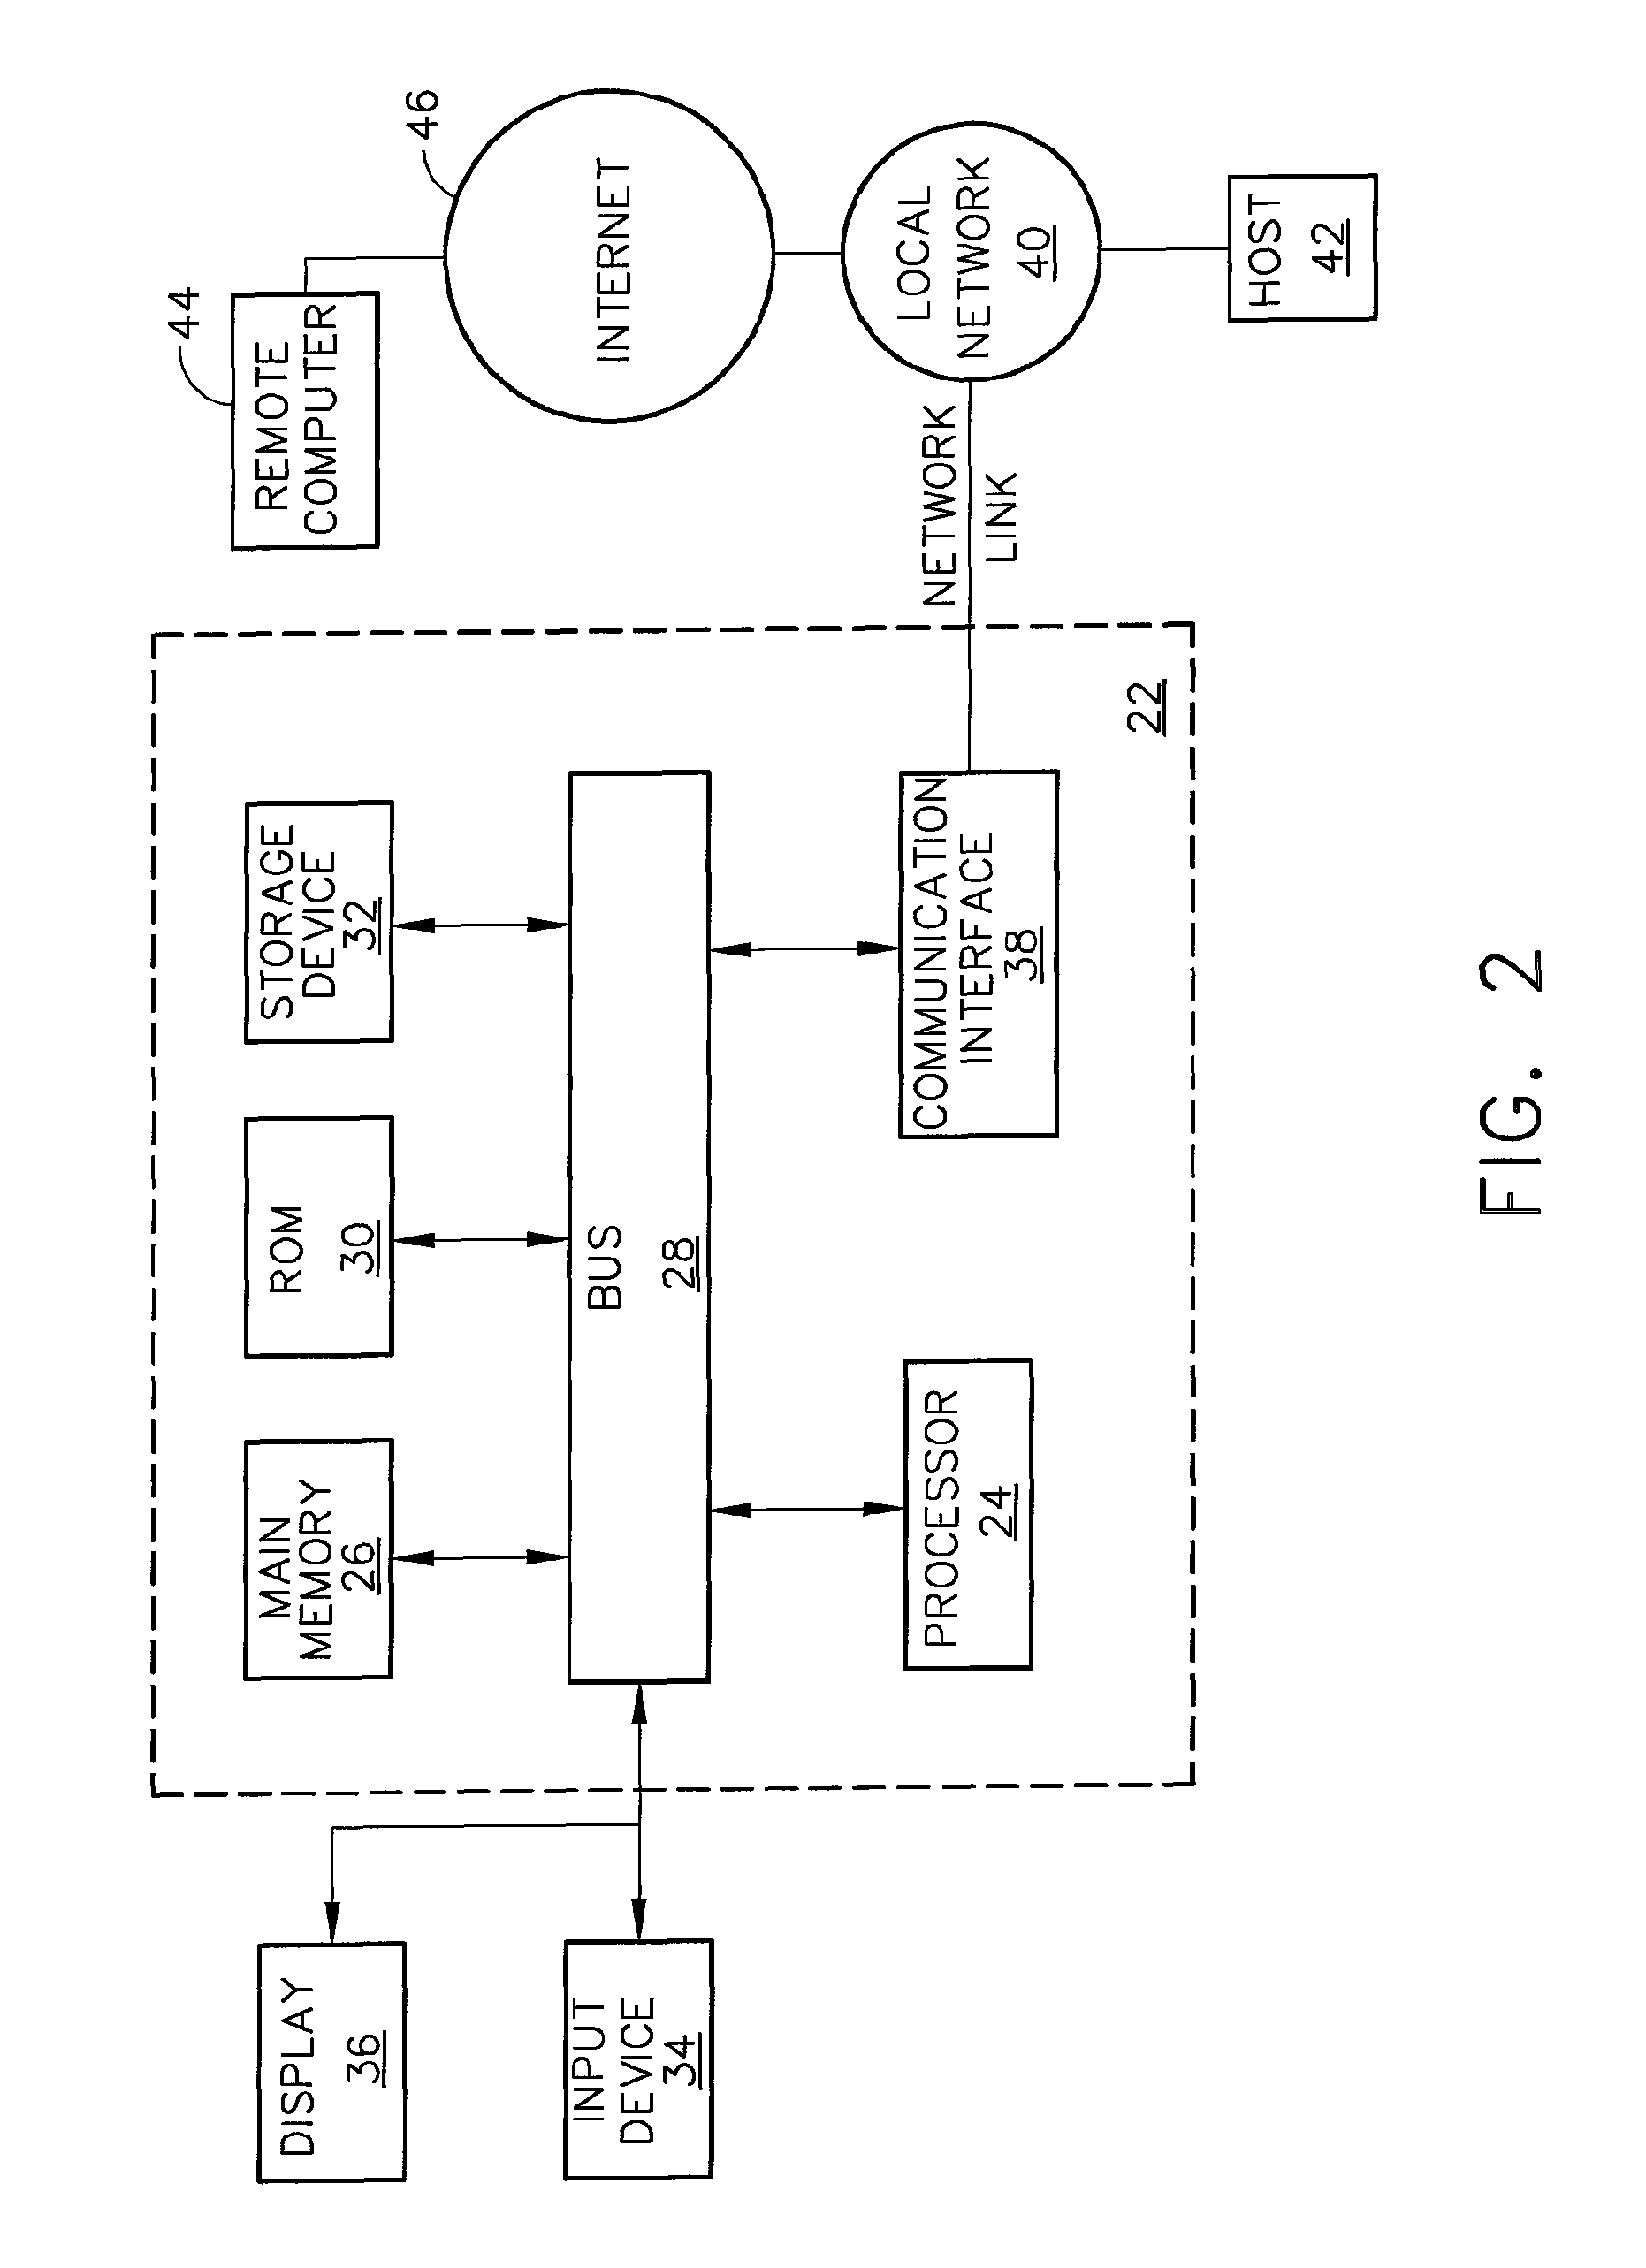 Systems and methods of providing fast leader elections in distributed systems of simple topologies